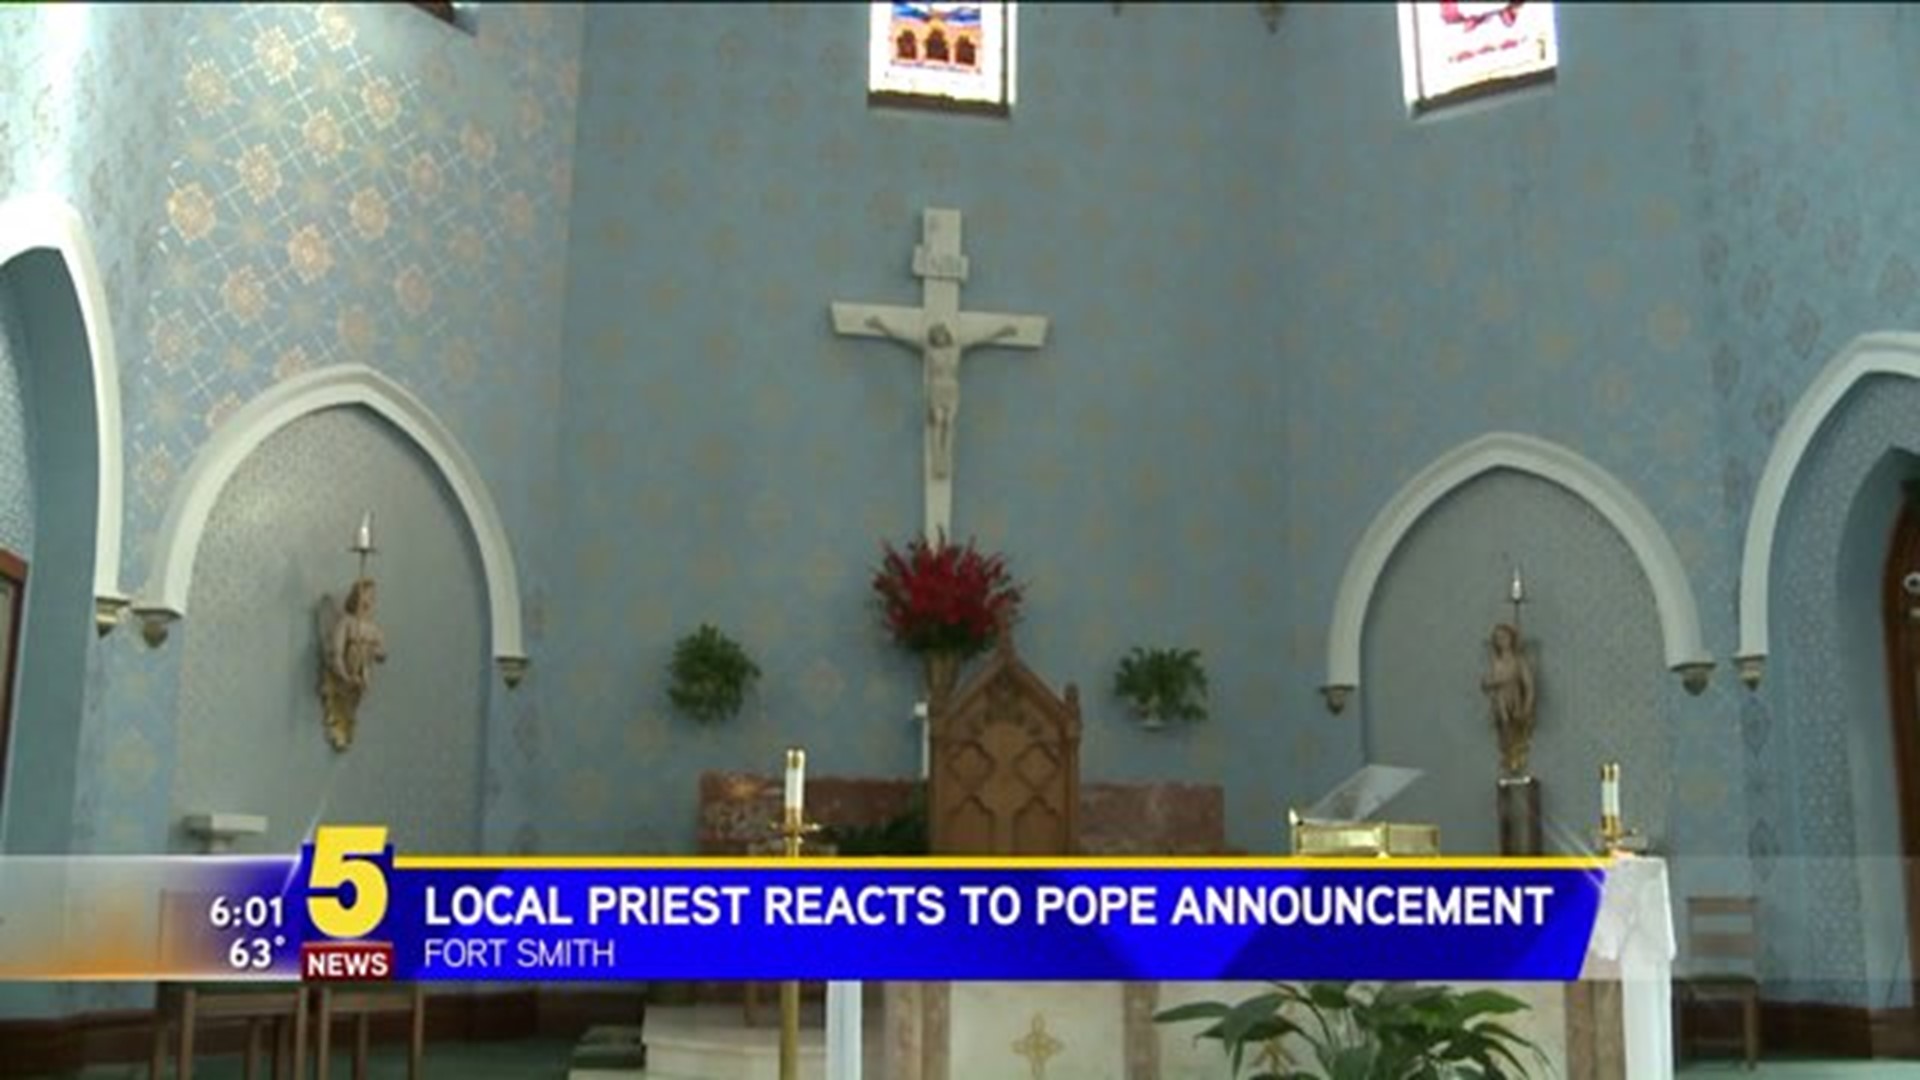 Local Priest Reacts To Pope Announcement